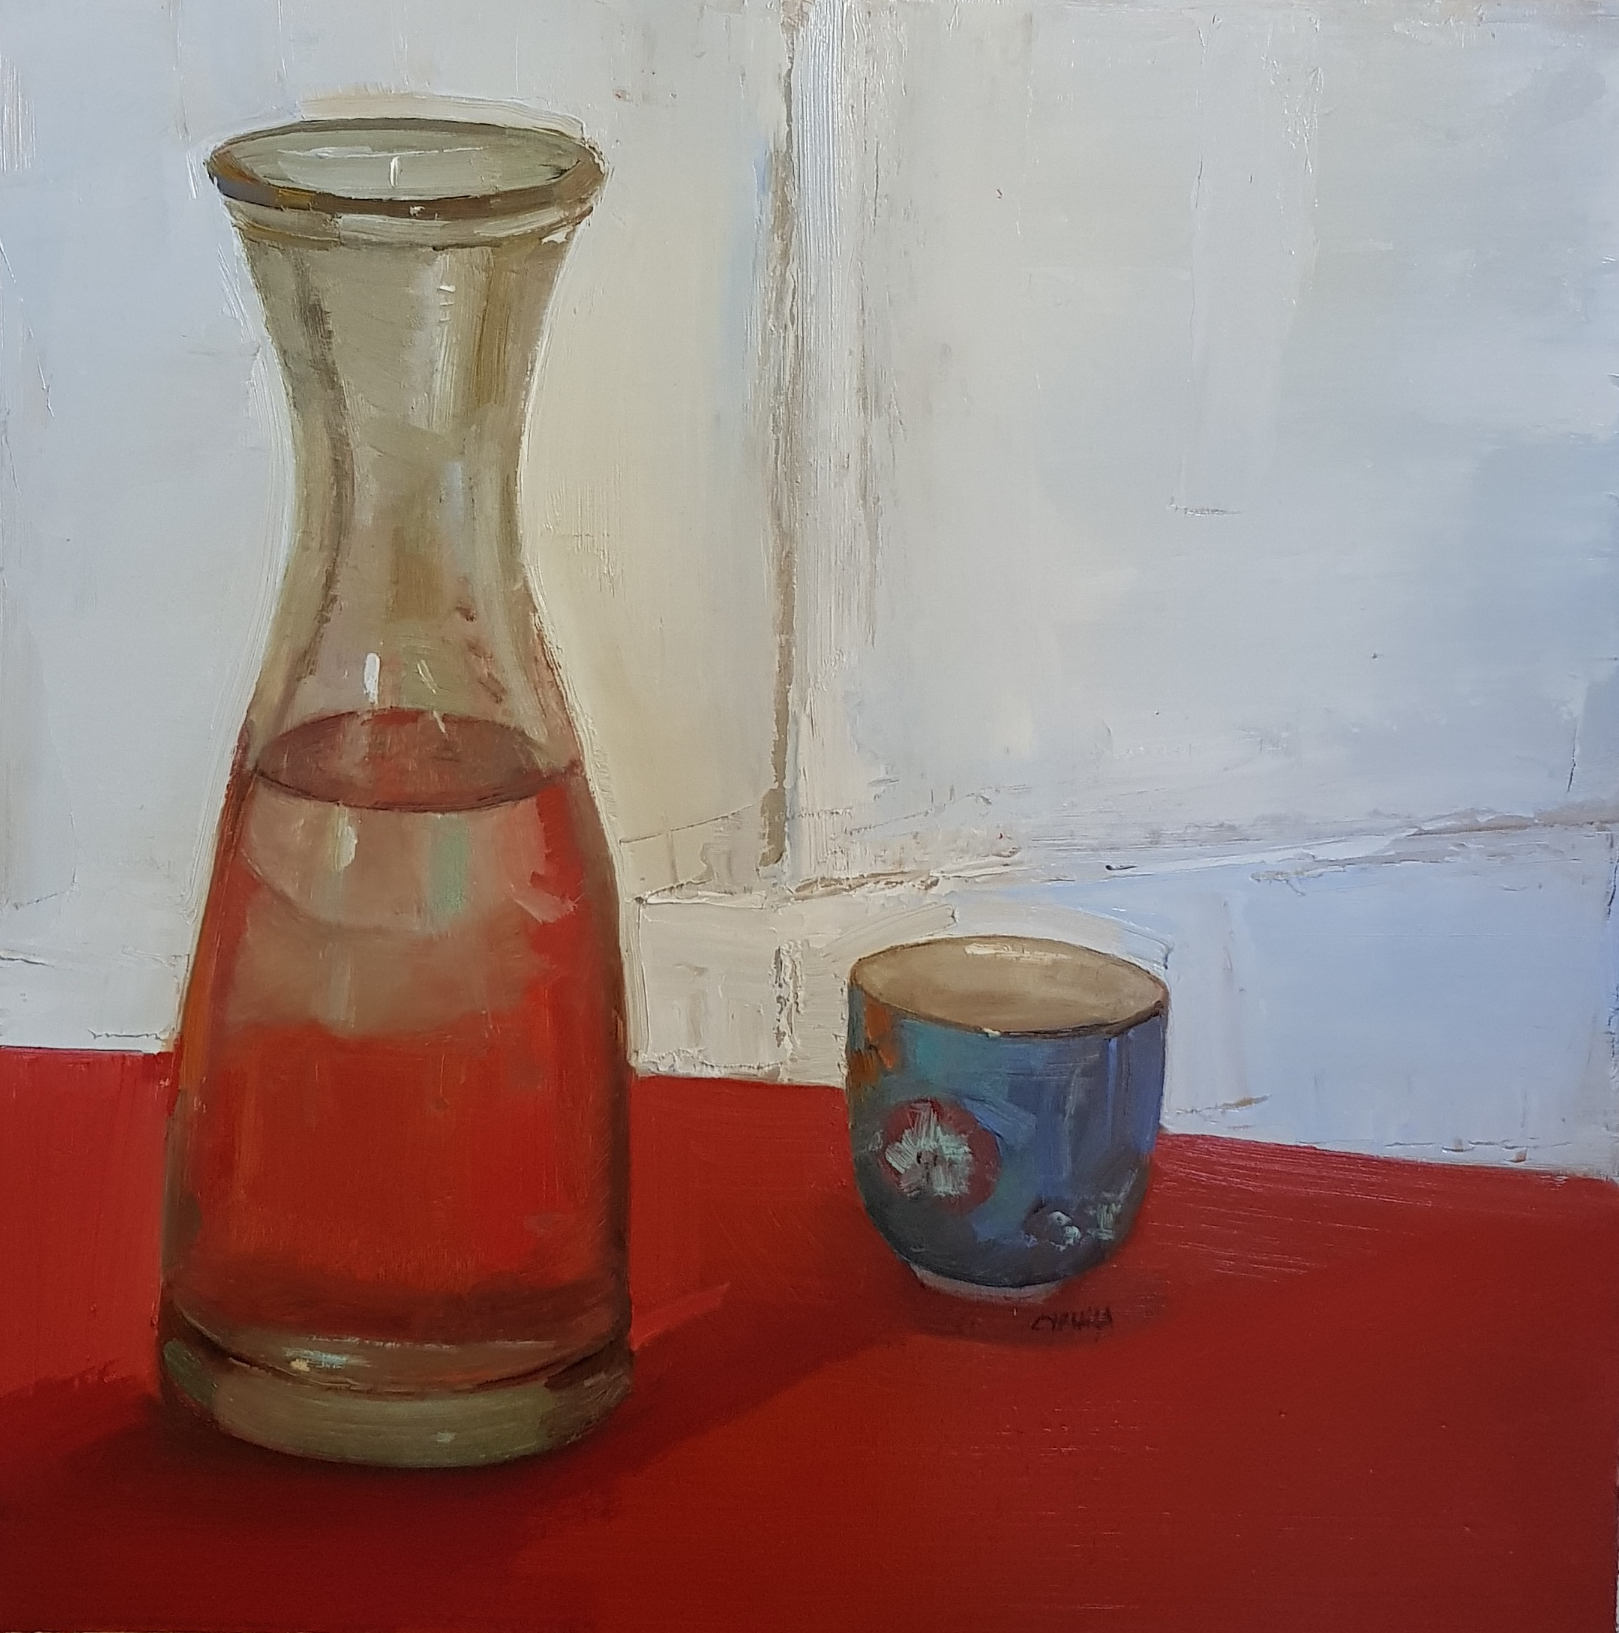 Cyrulla vase and blue cup in red and white oil on linen 40 x 40cm